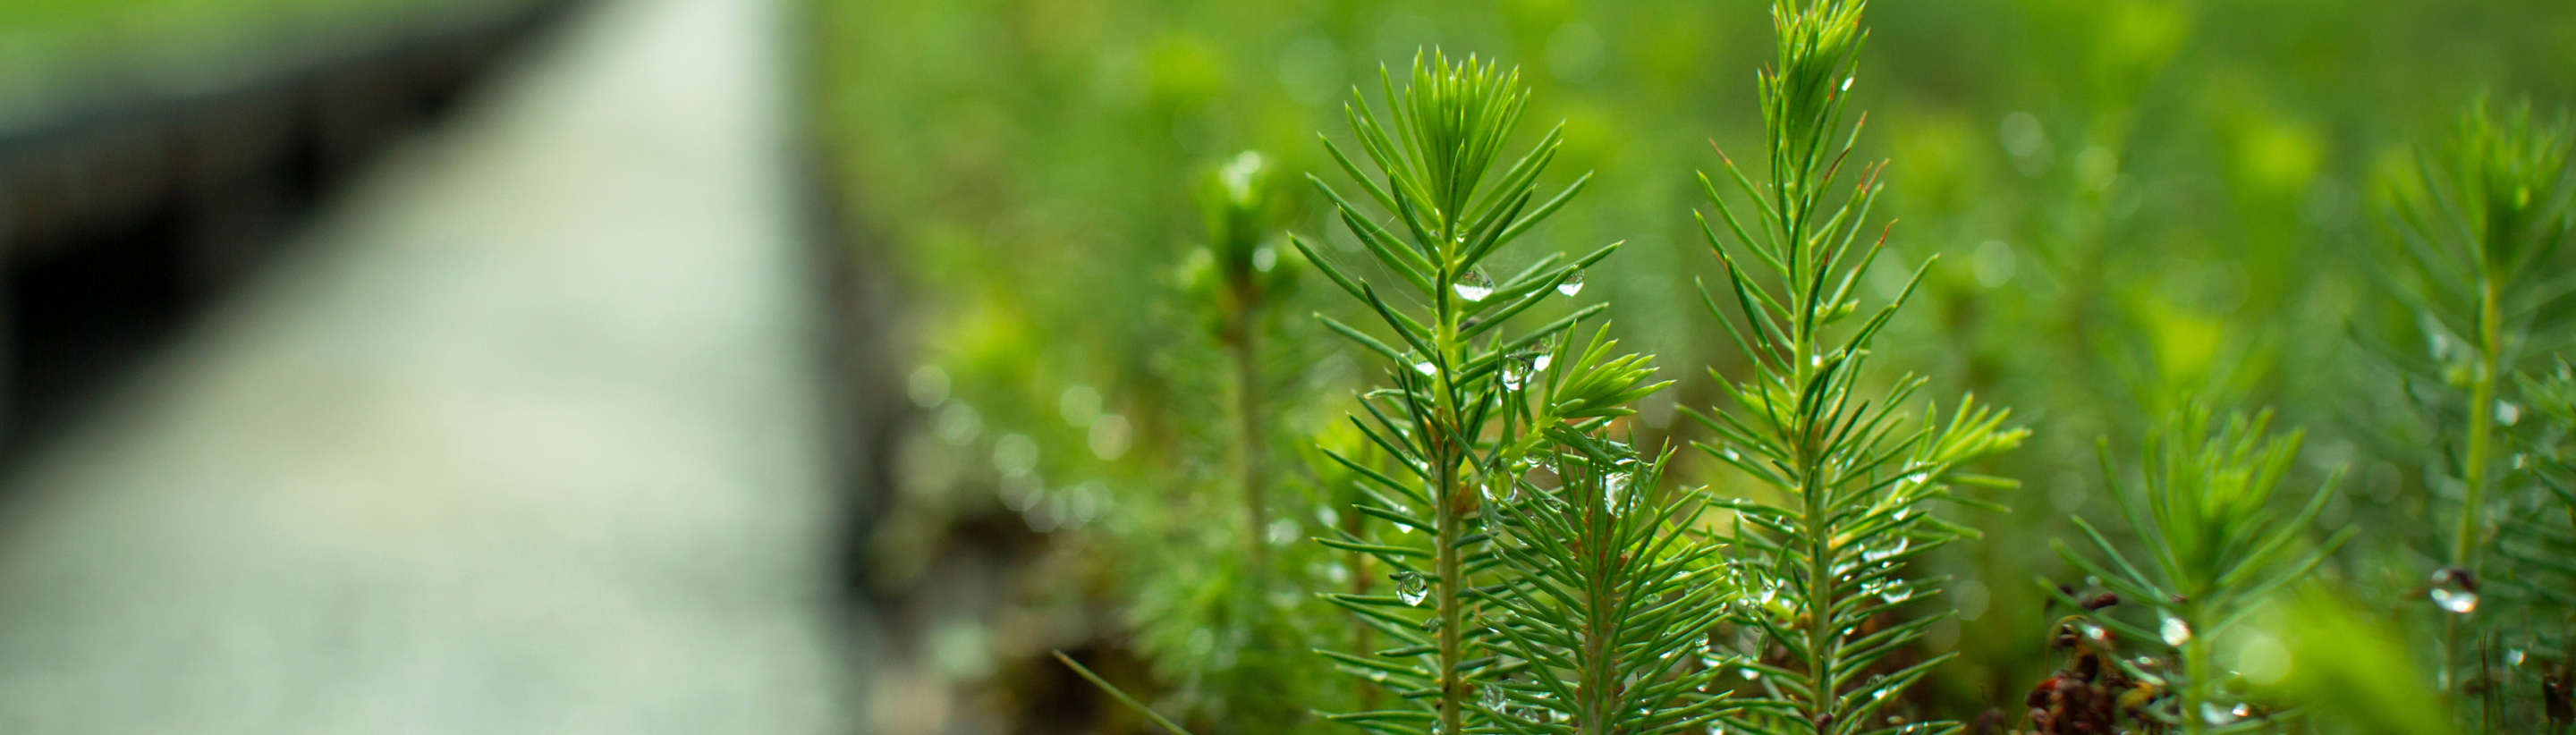 close-up picture of pines